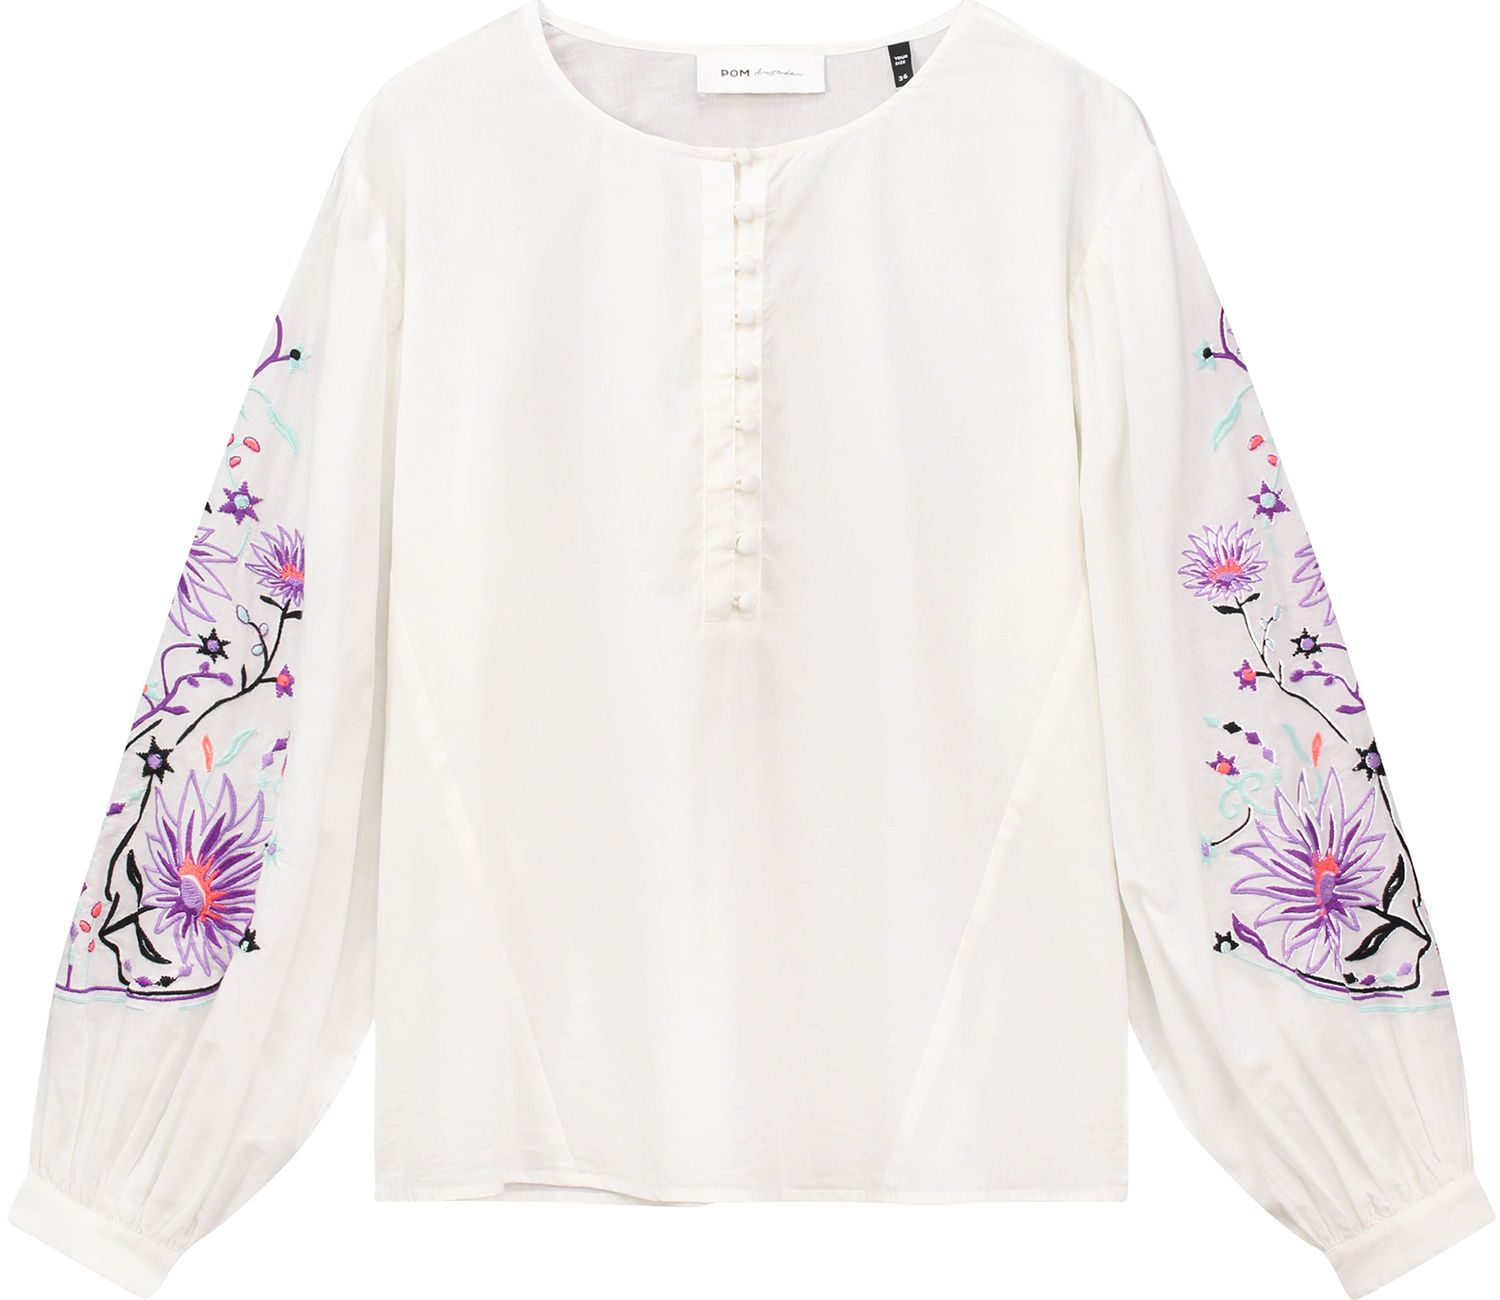 Pom Amsterdam Blouse Embroidery Beige